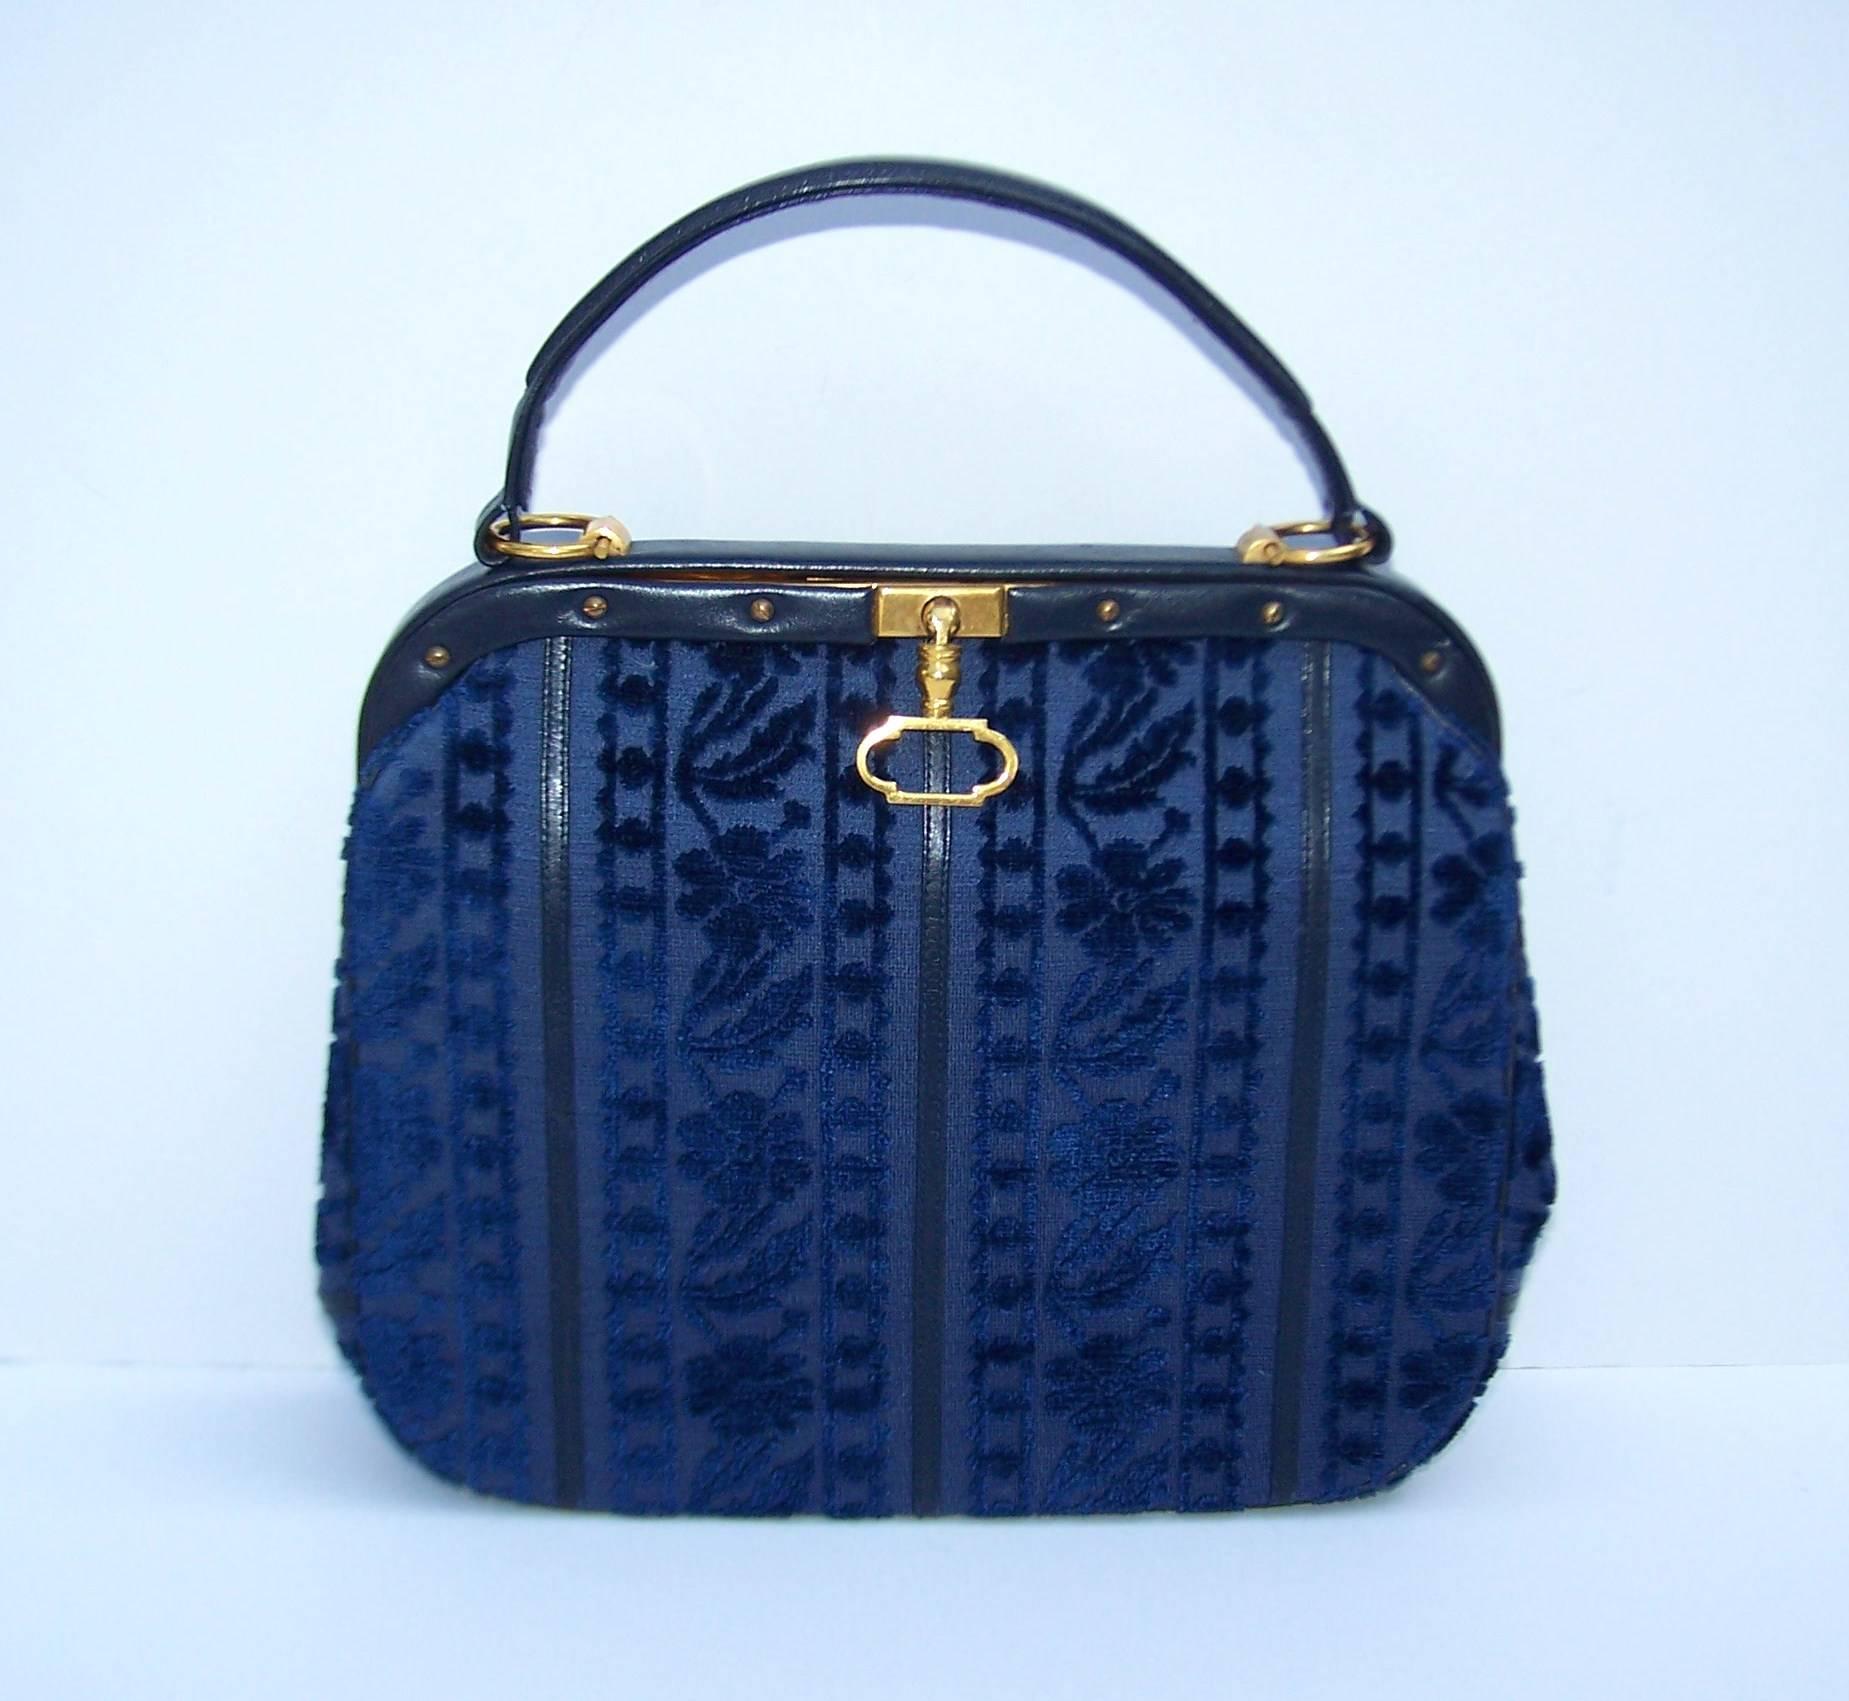 Giuliana Camerino's designs are precious baubles and the perfect fashion accessory.  This beautiful blue cut velvet handbag is trimmed in leather with a leather handle and gold metal hardware.  The leather interior features one zippered pocket and